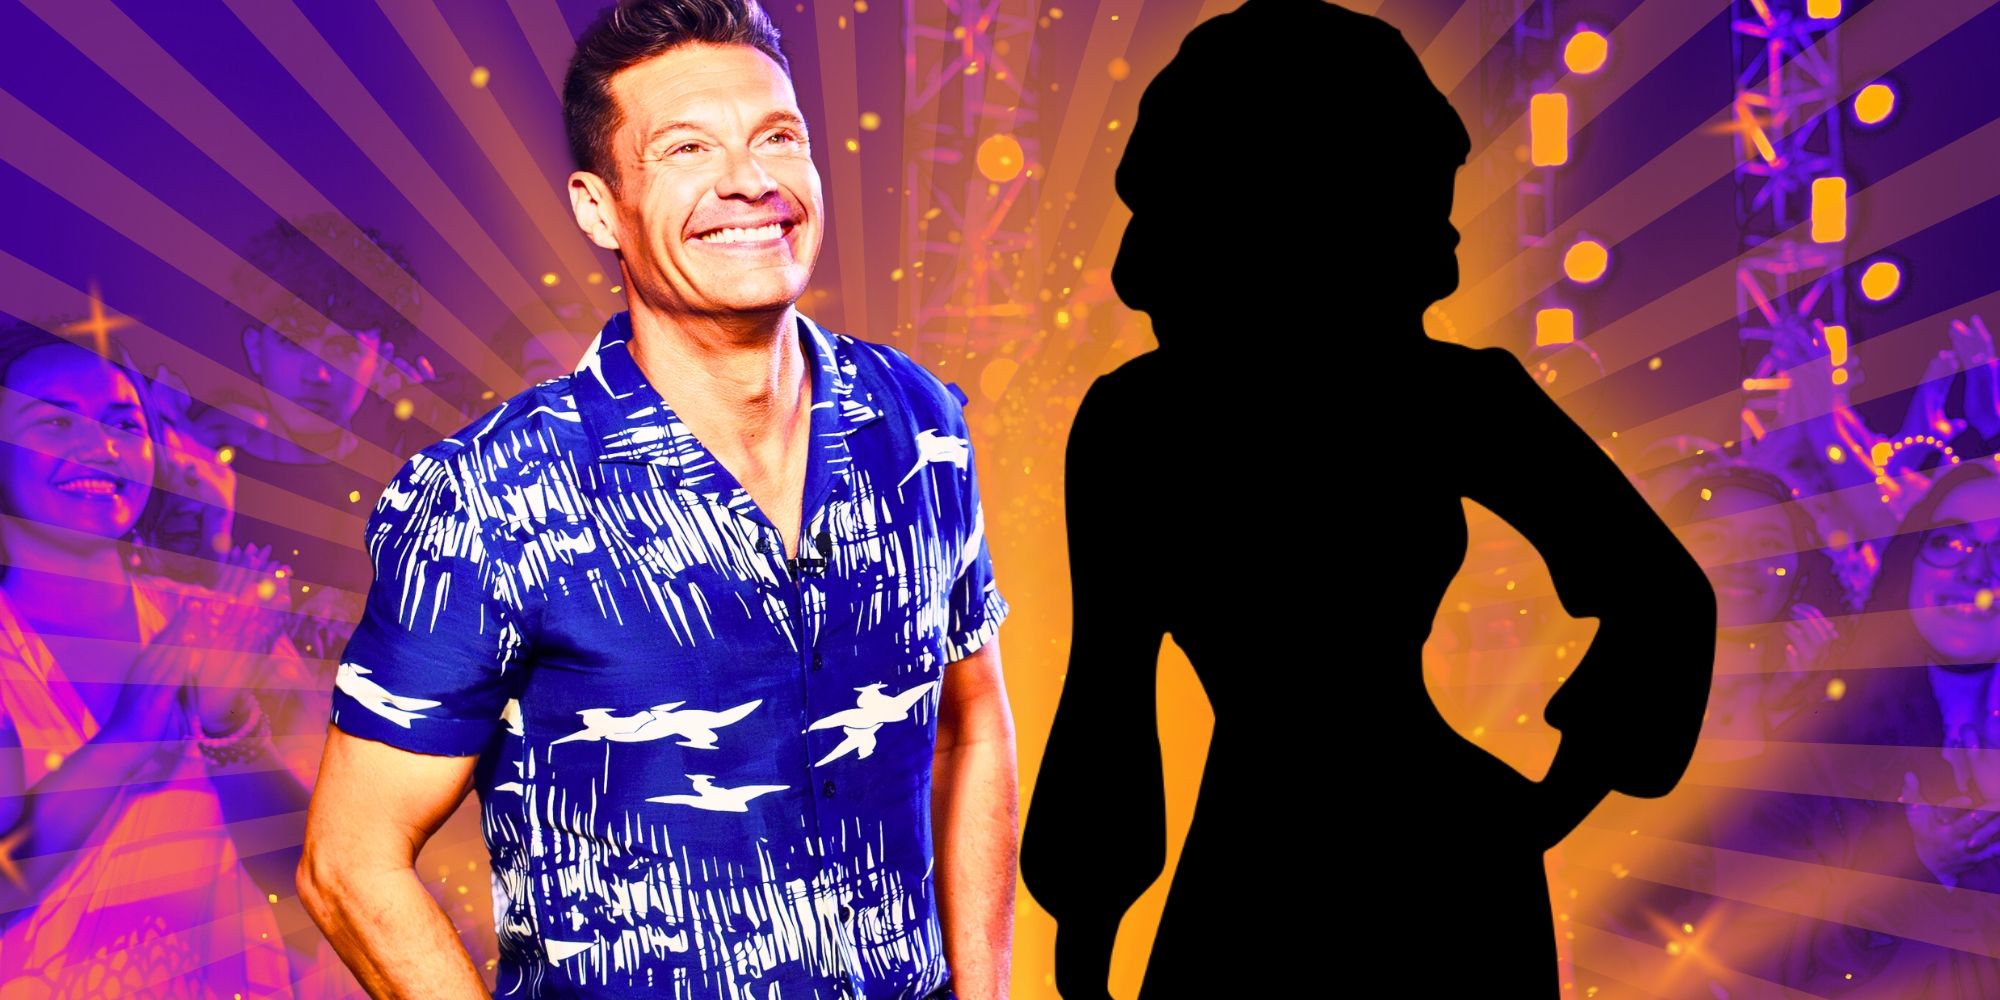 Ryan Seacrest, host of American Idol, with a mystery co-host silhouette